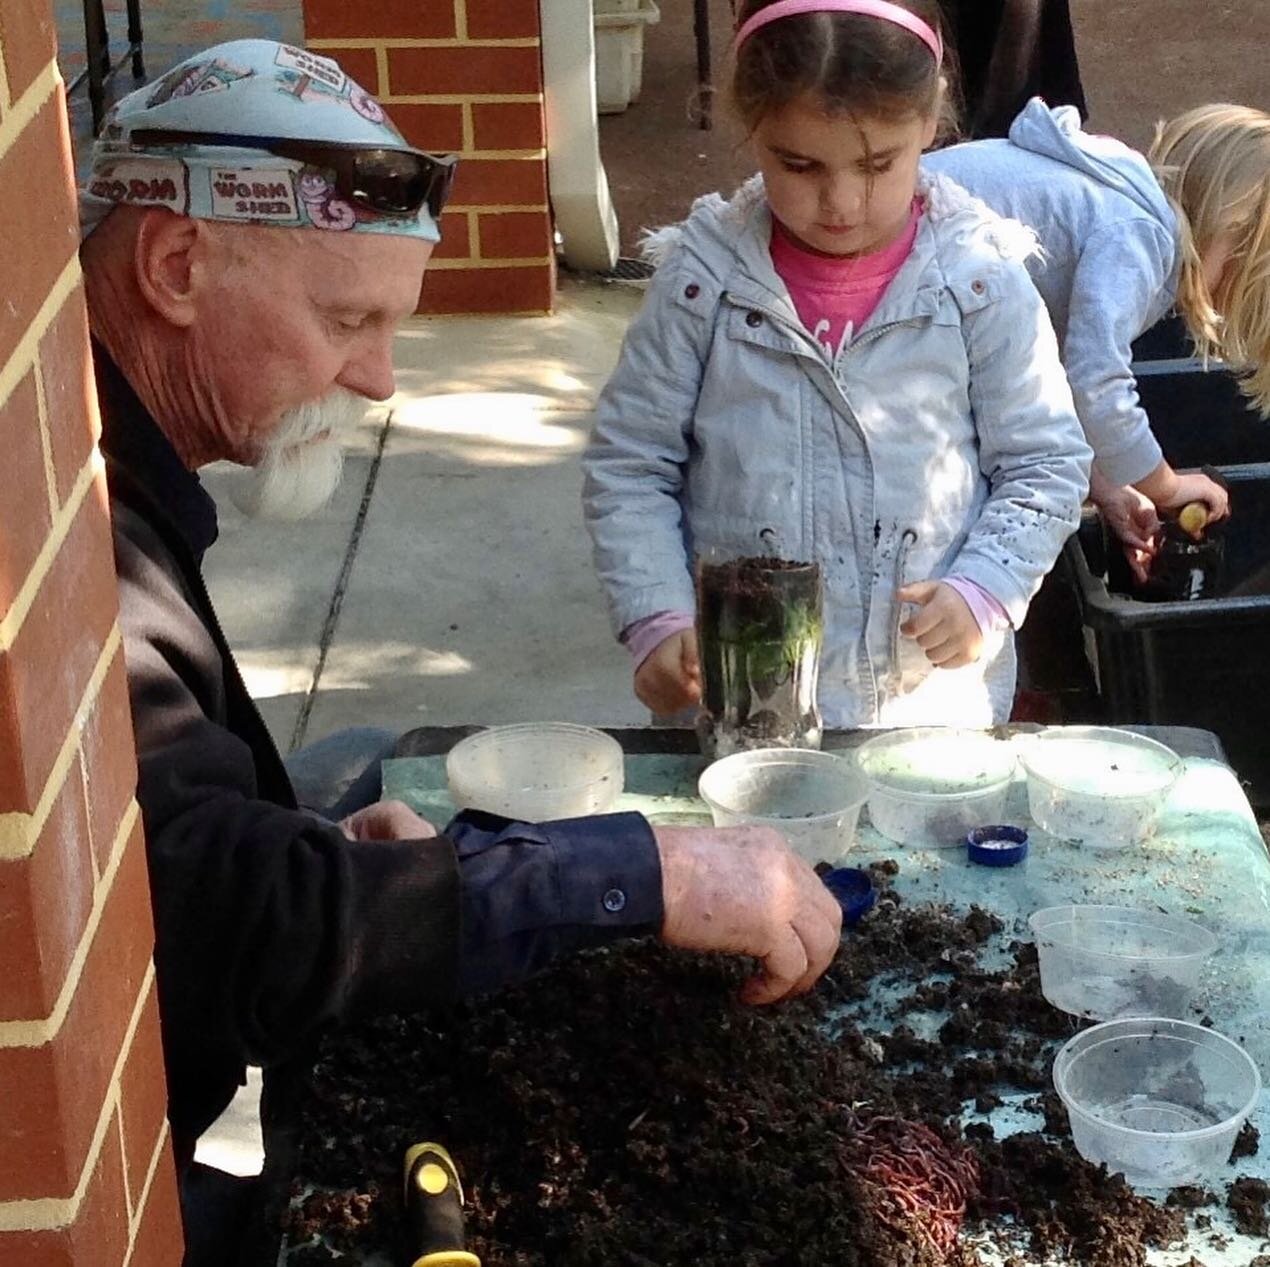 At kindy we host regular incursions throughout the year, bringing many fun adventures right into kindy. To close out Term 2, we had our friends from @thewormshed teach us all about recycling, sustainability and worms, with all the kindy kids making t